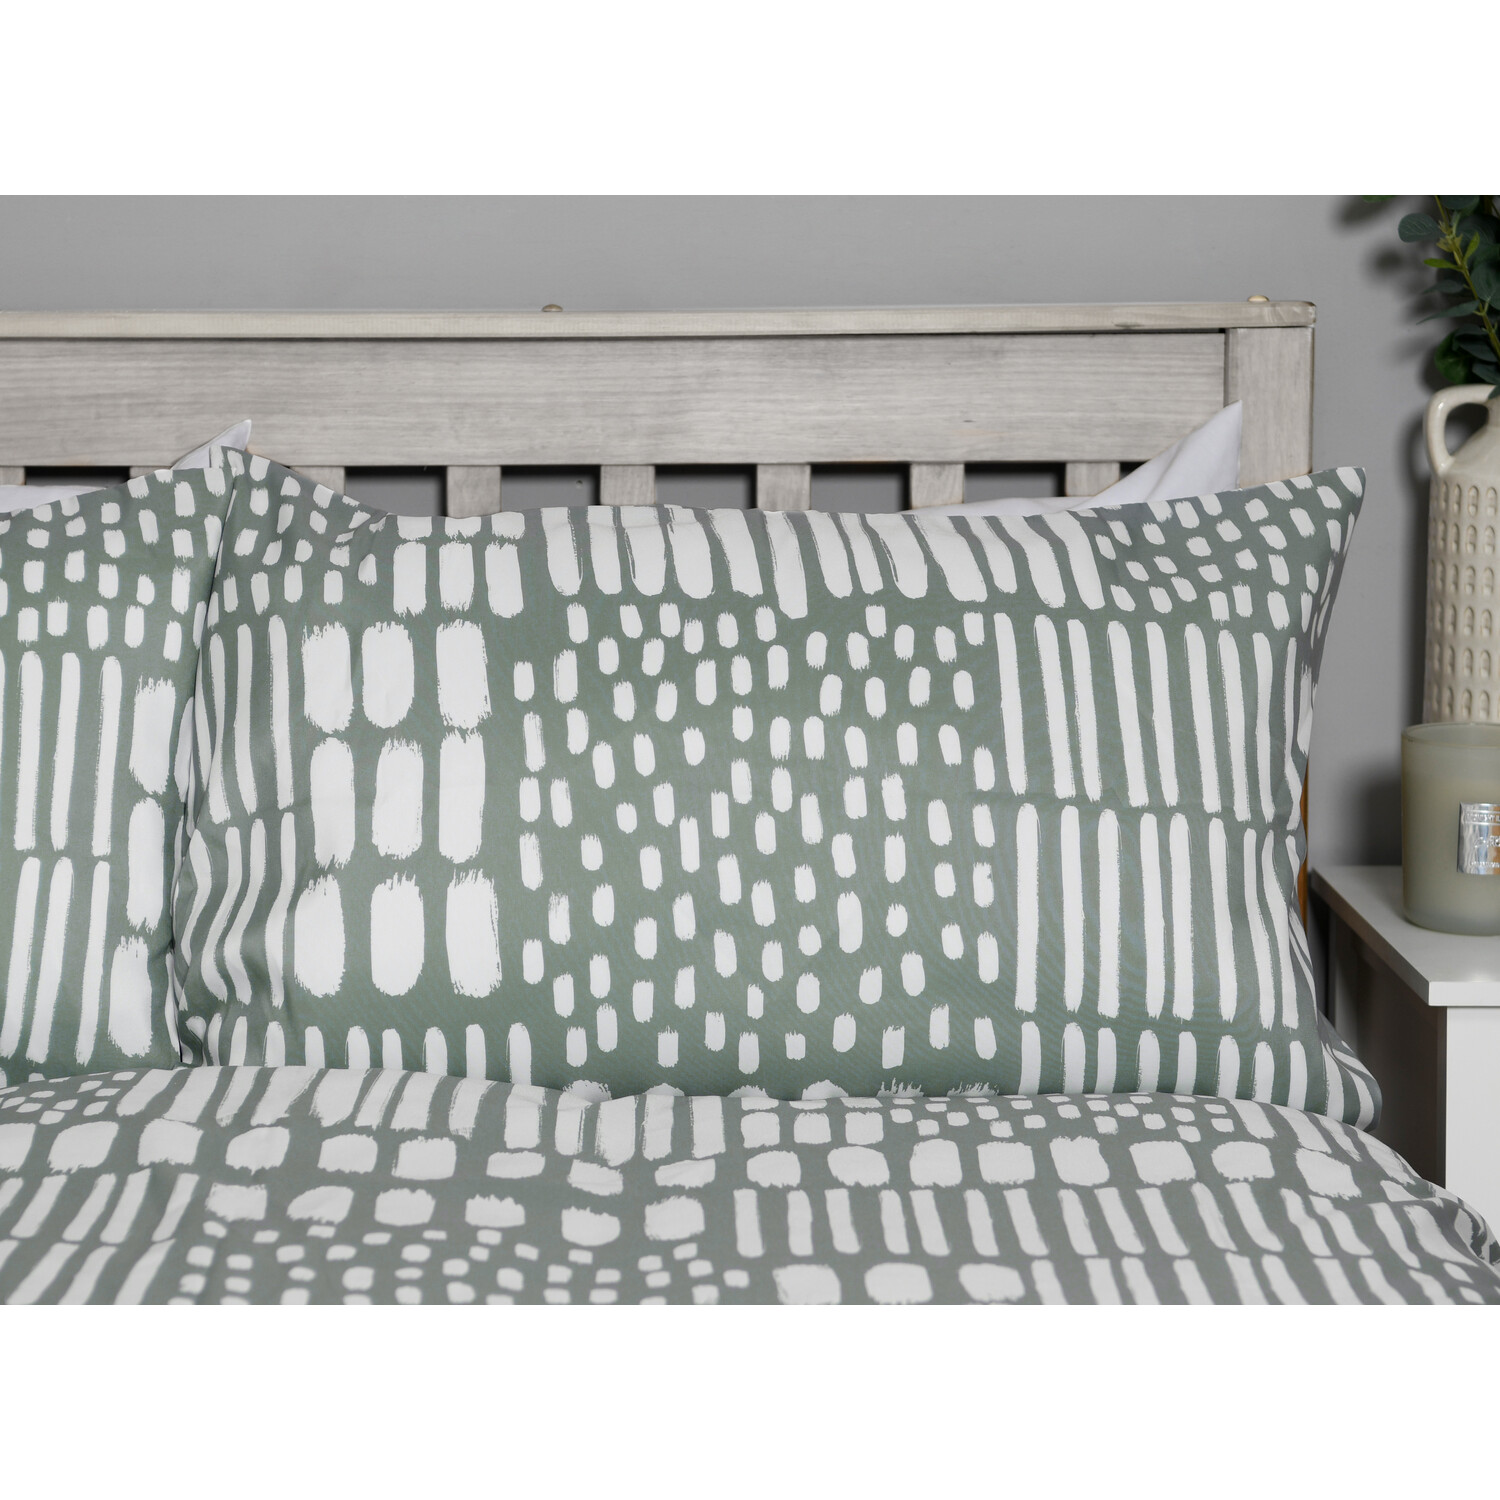 My Home Kailani King Size Sage Duvet Cover and Pillowcase Set Image 3